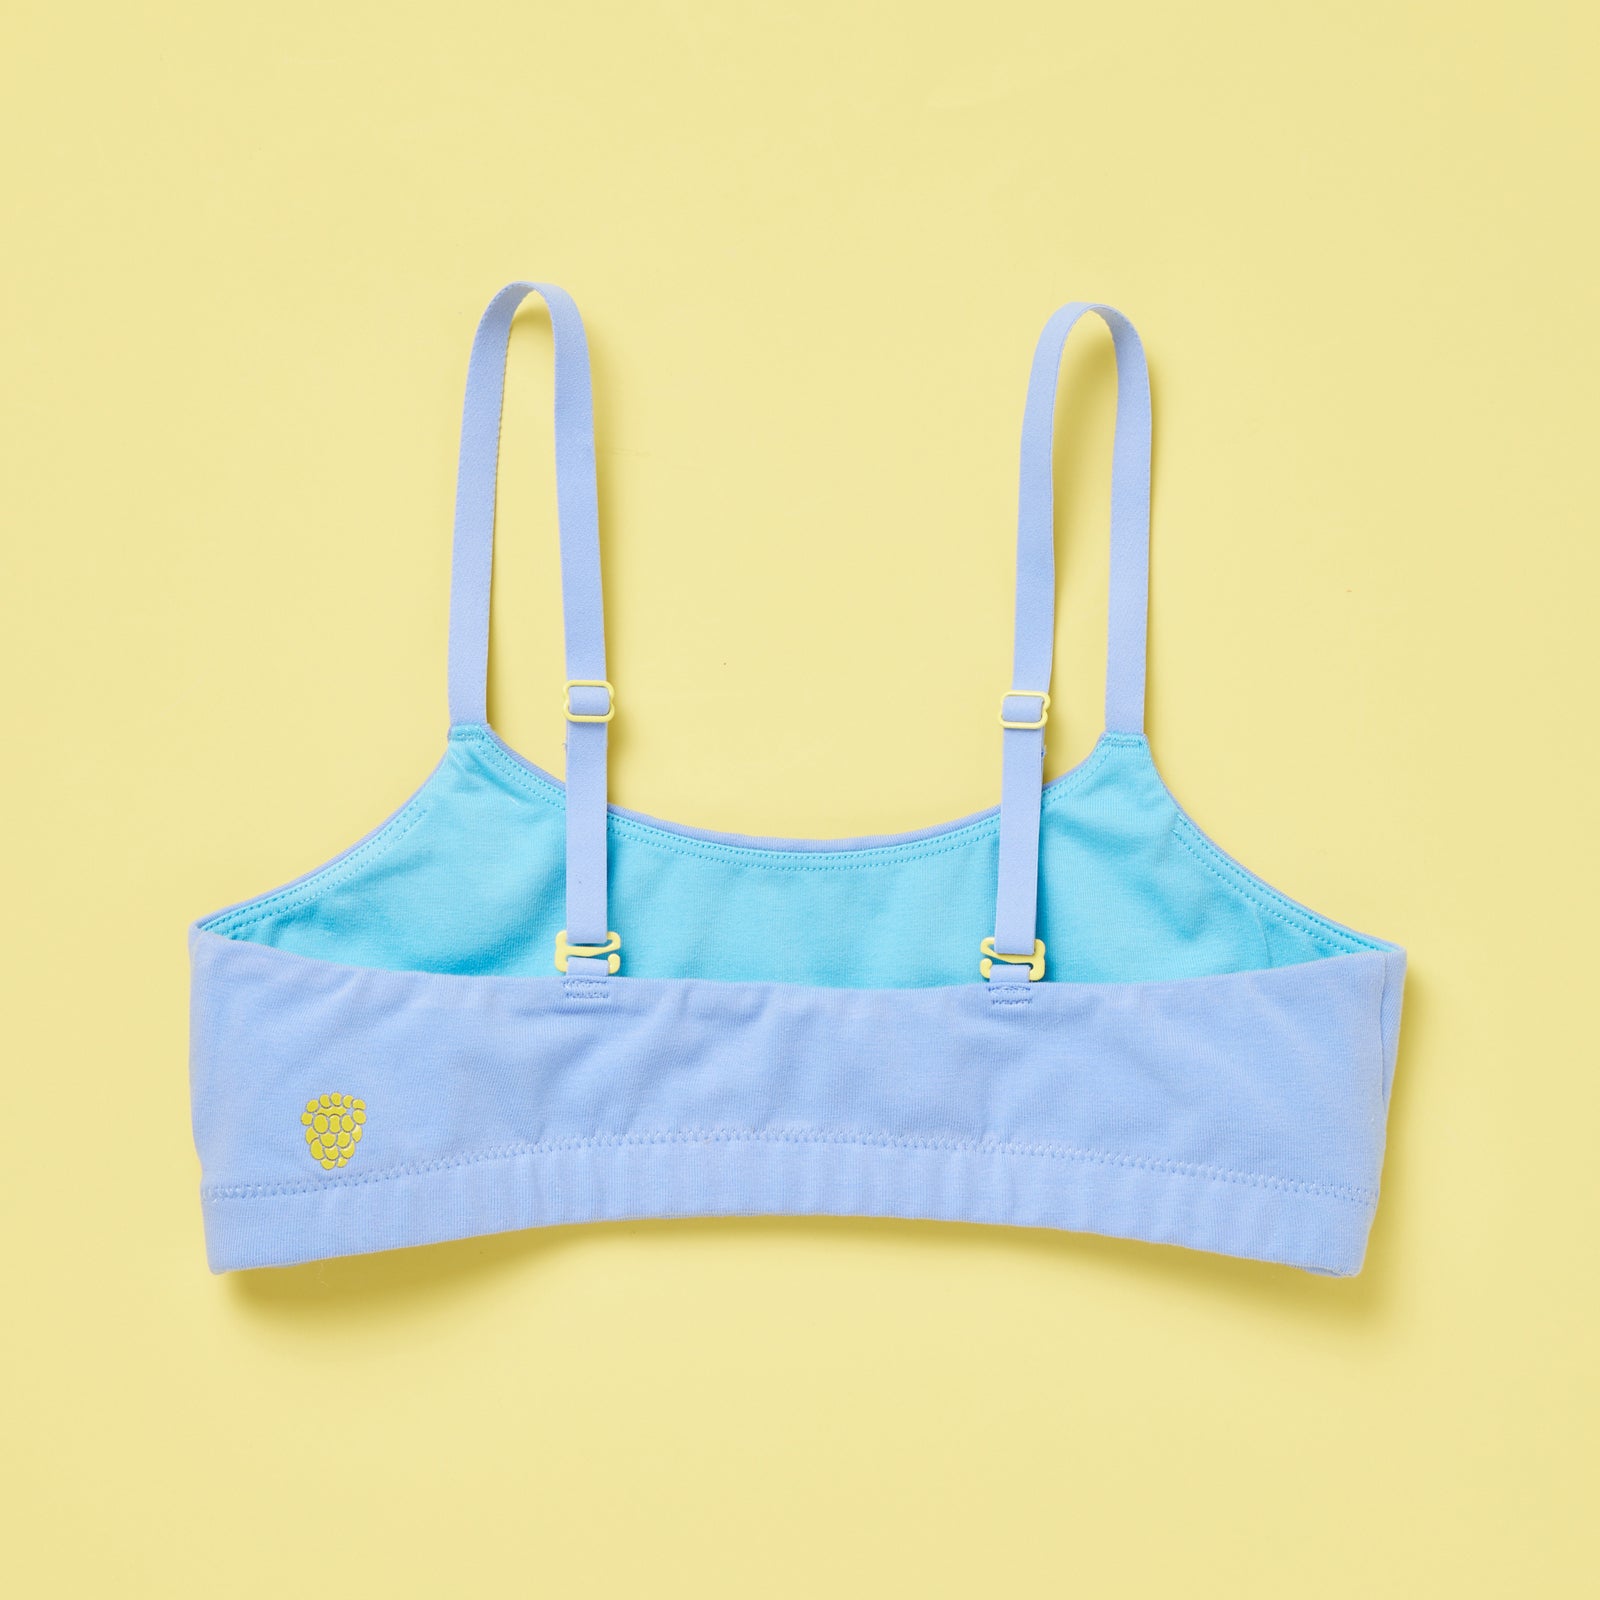 Yellowberry: First bras for girls that their moms will approve of too.